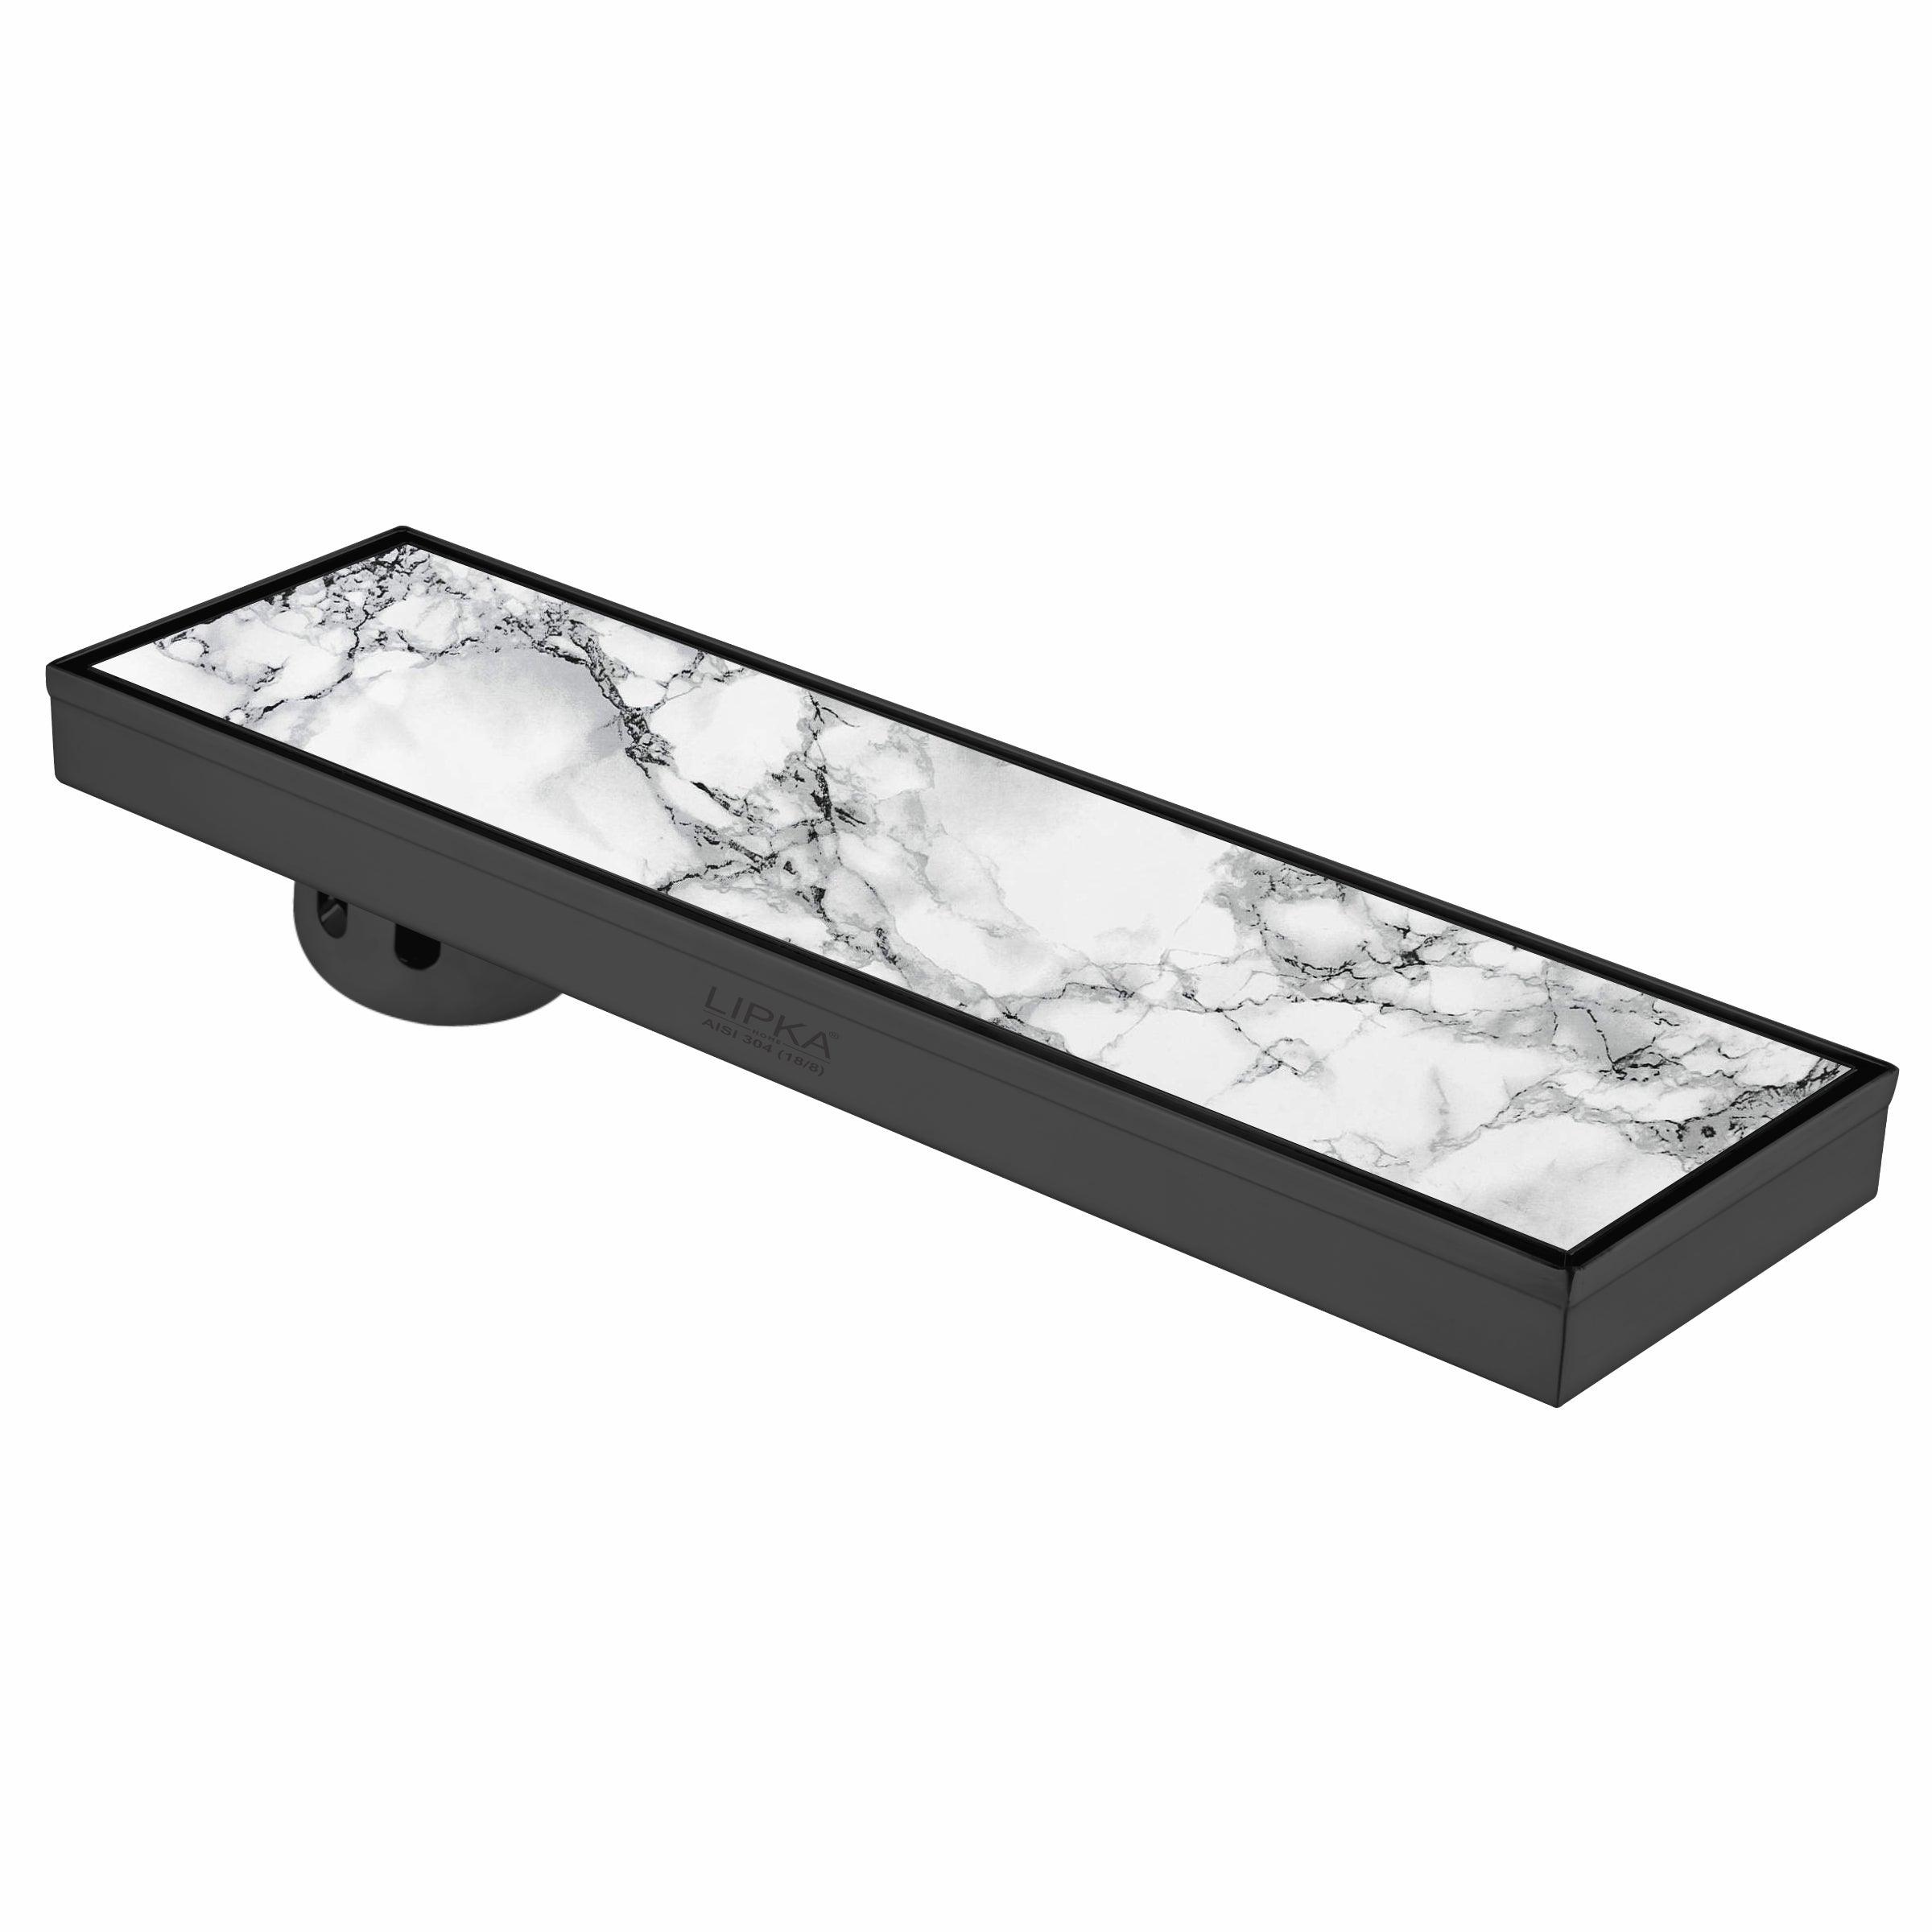 Marble Insert Shower Drain Channel - Black (24 x 3 Inches)